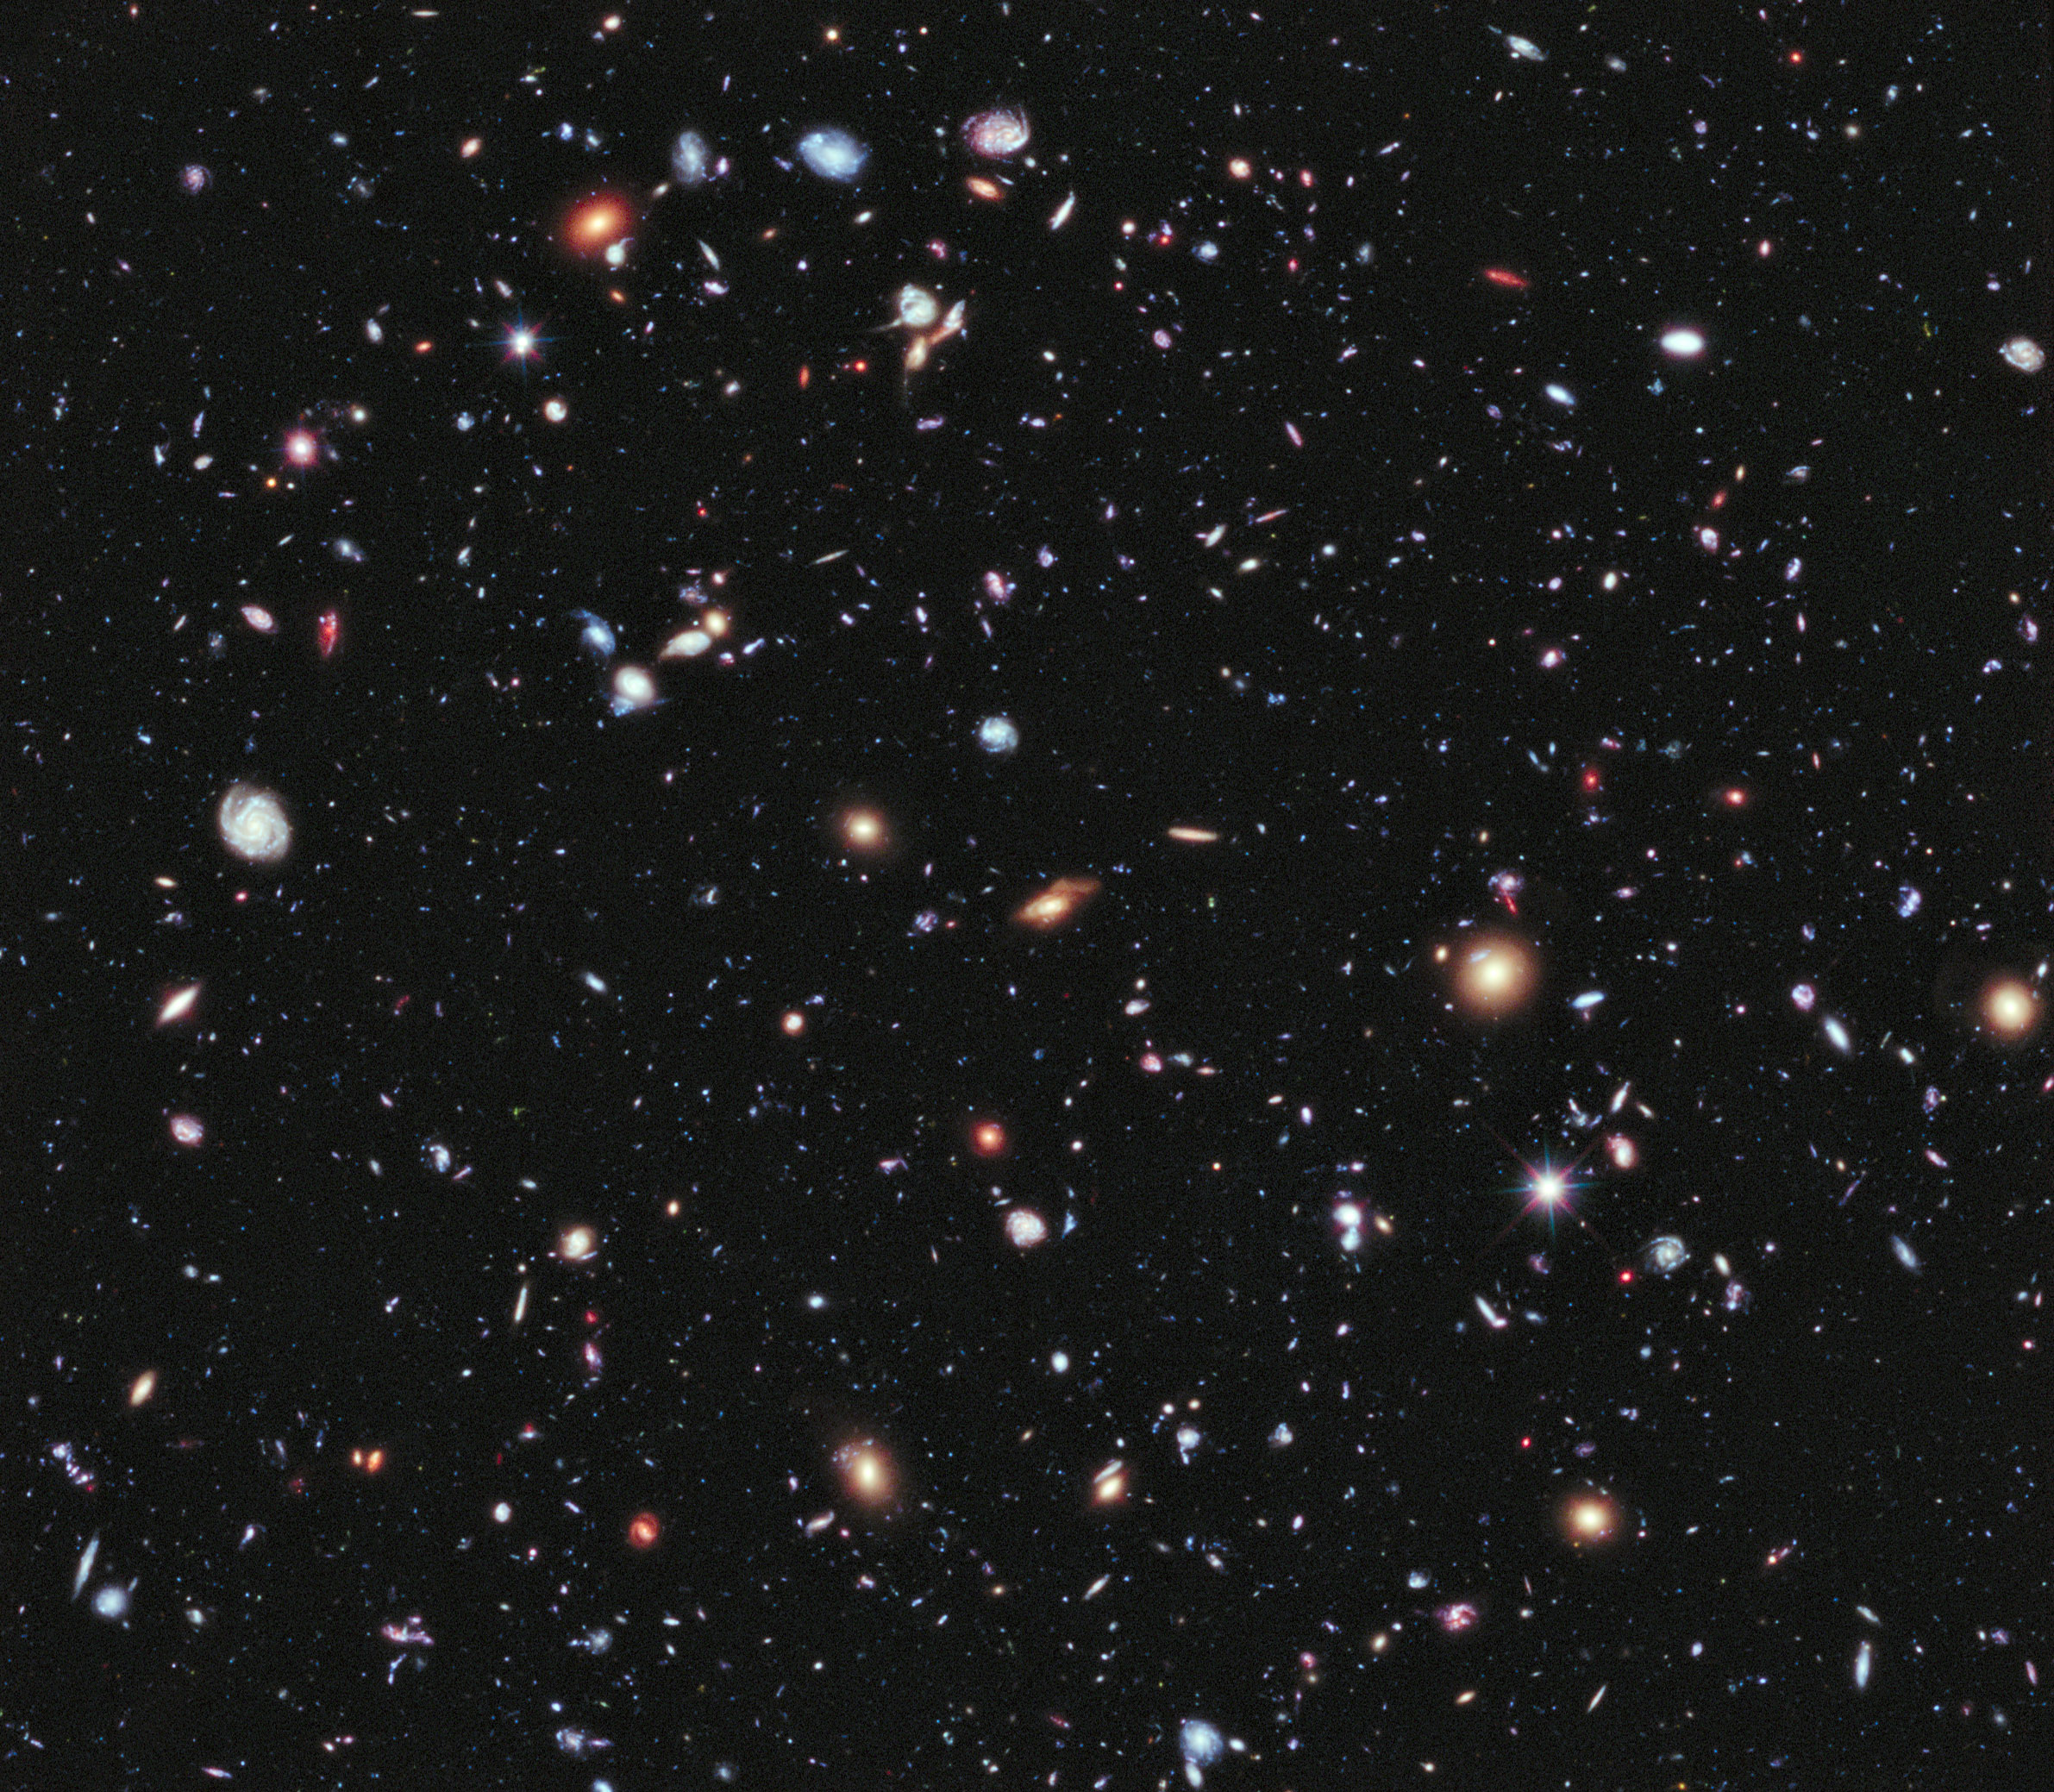 Hubble Space Telescope image showing a field of thousands of galaxies appearing as blobs of different sizes, shapes, and colours, against a black backdrop.